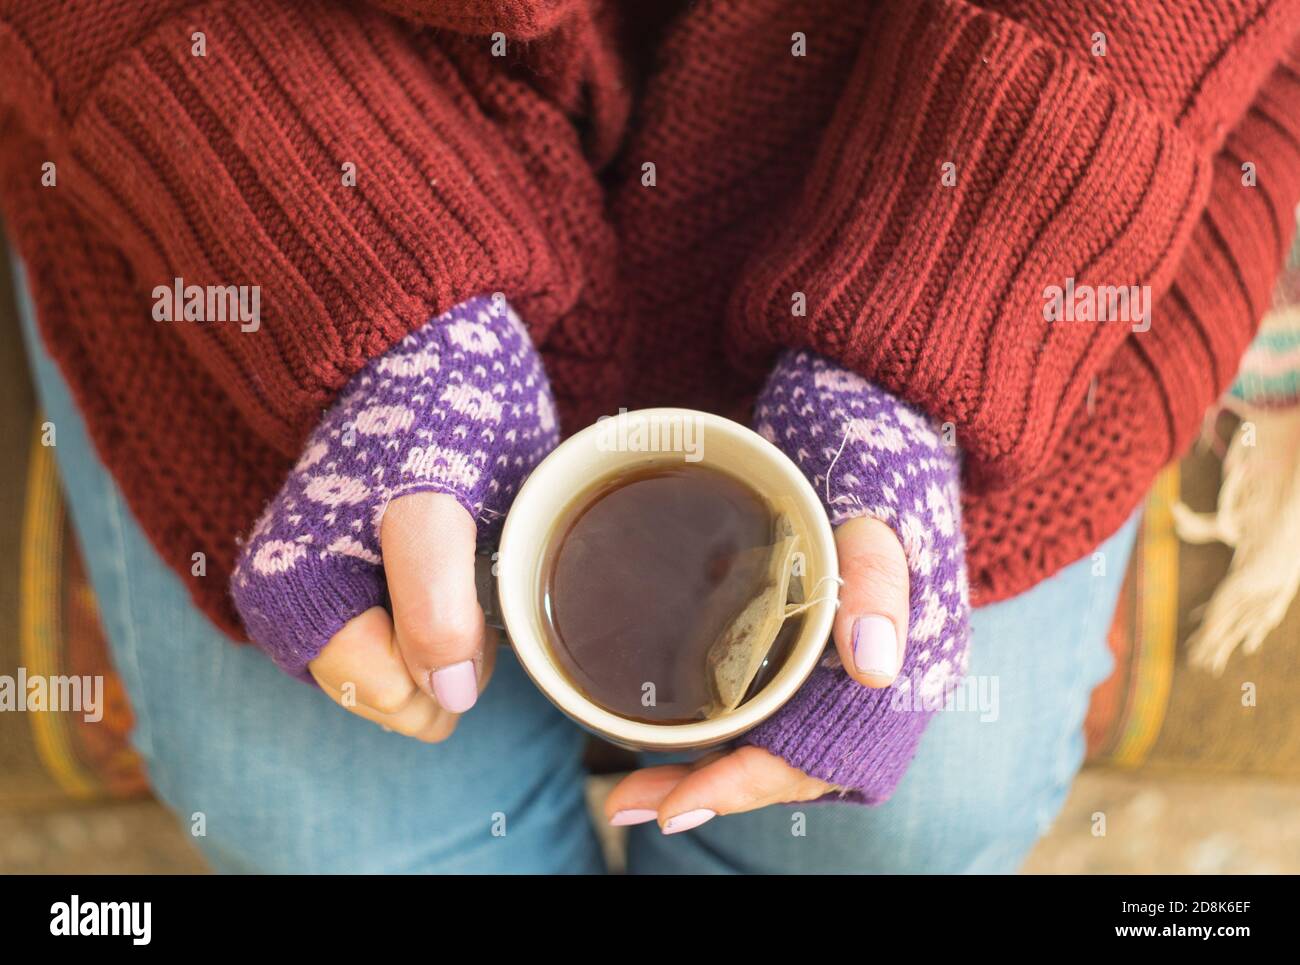 Top view of girls hands holding a mug with tea Stock Photo